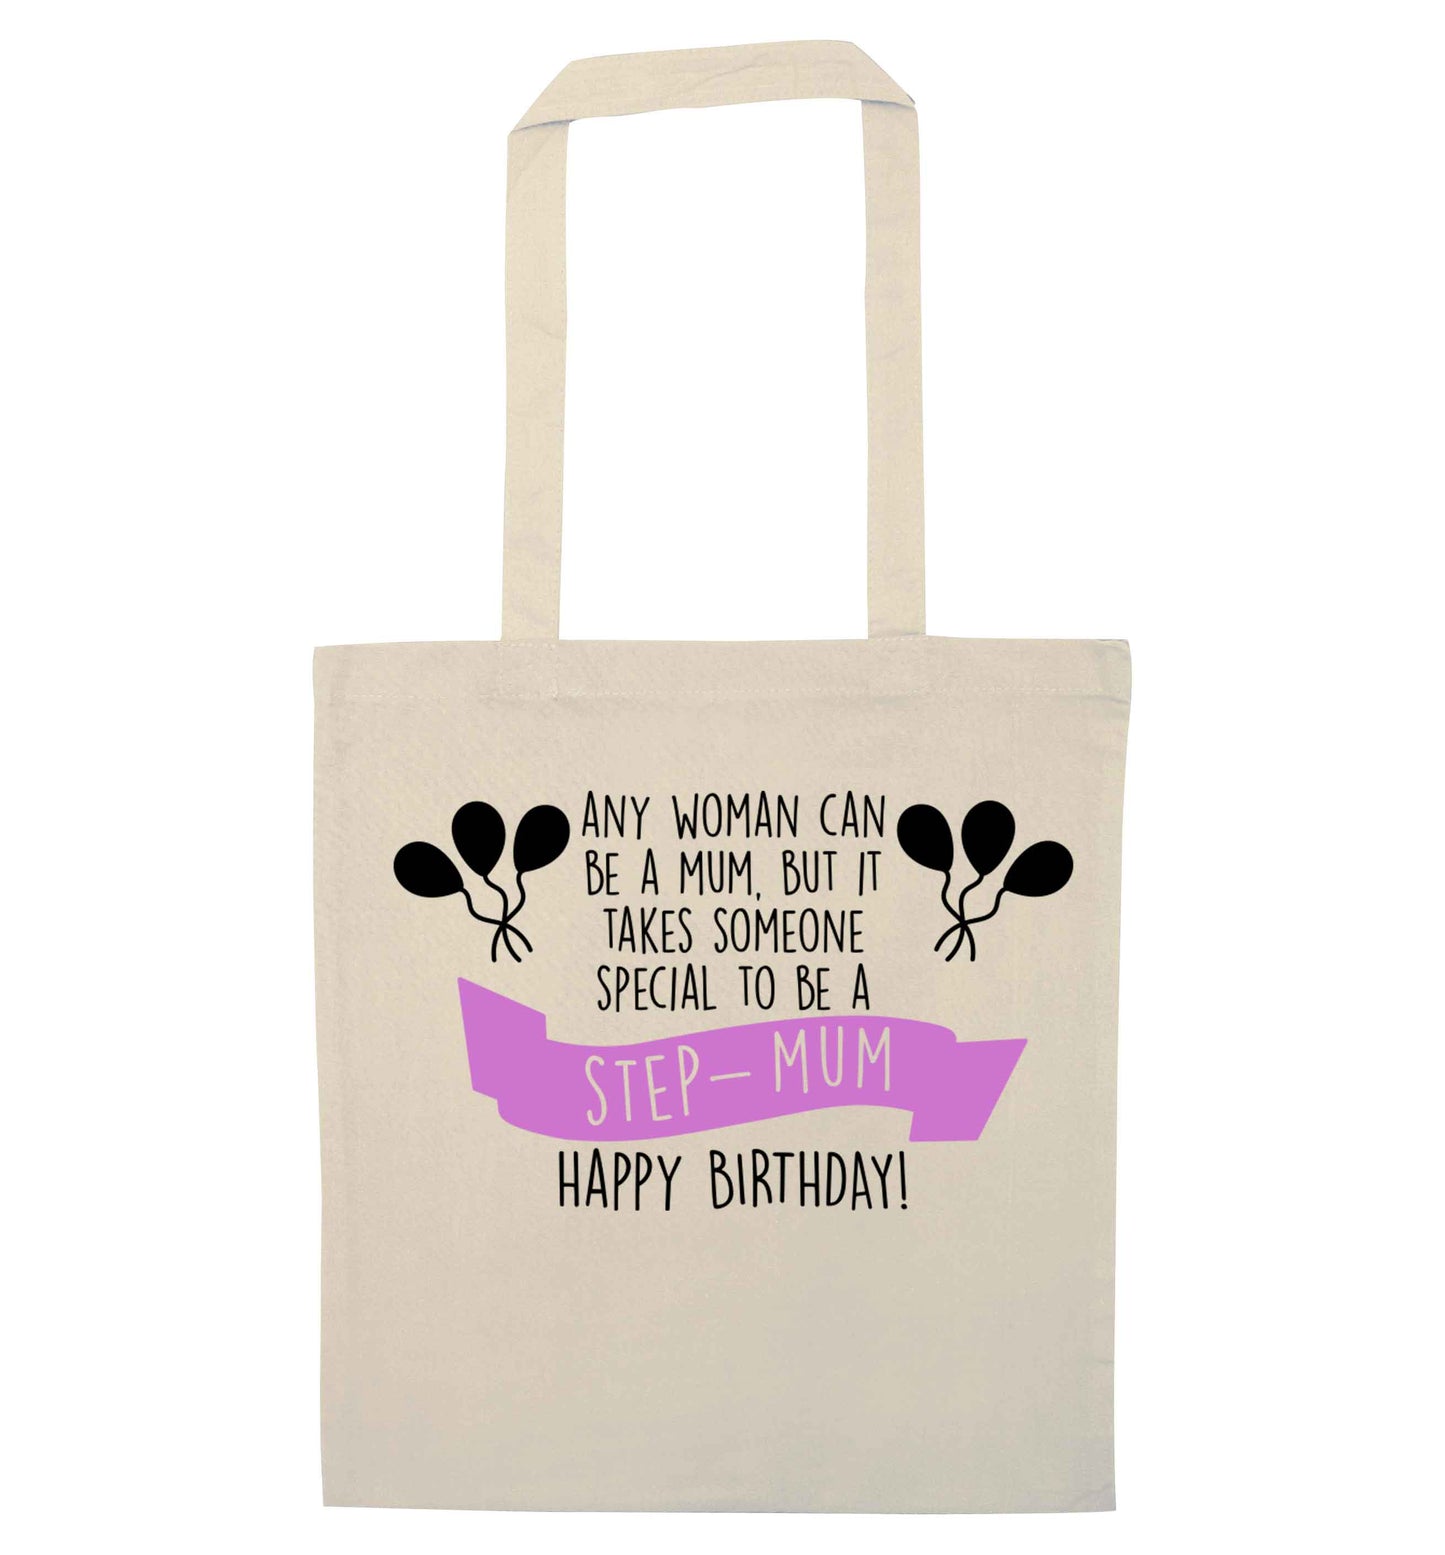 Takes someone special to be a step-mum, happy birthday! natural tote bag